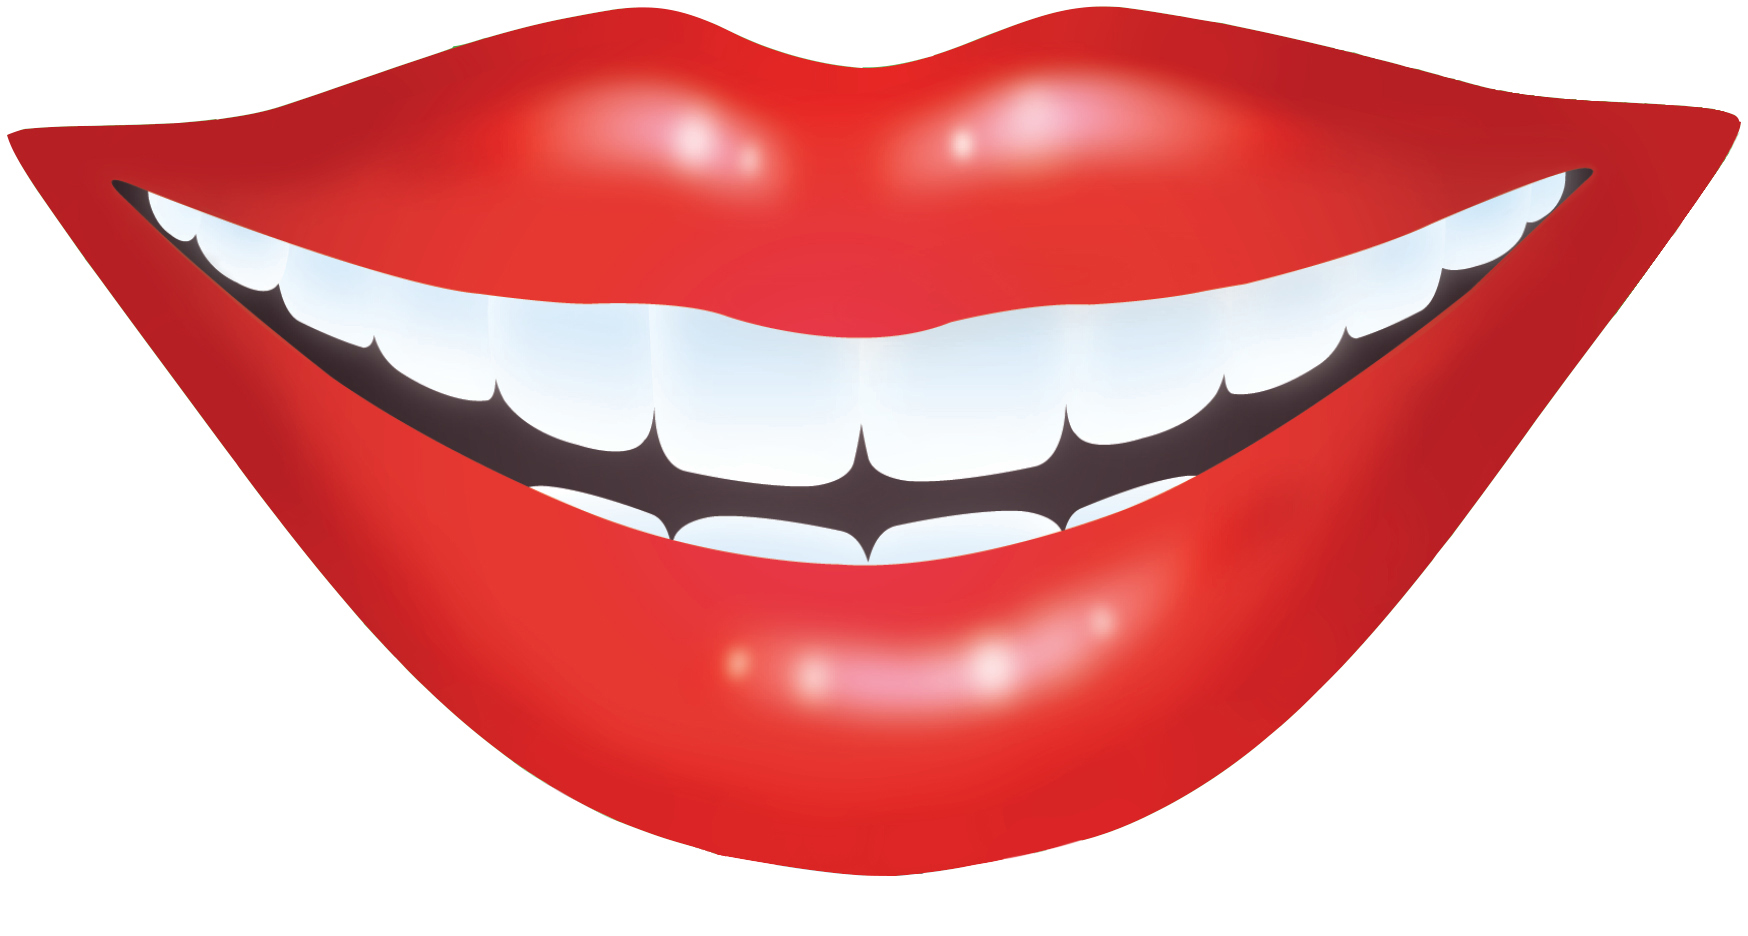 Smiling Lips Clipart